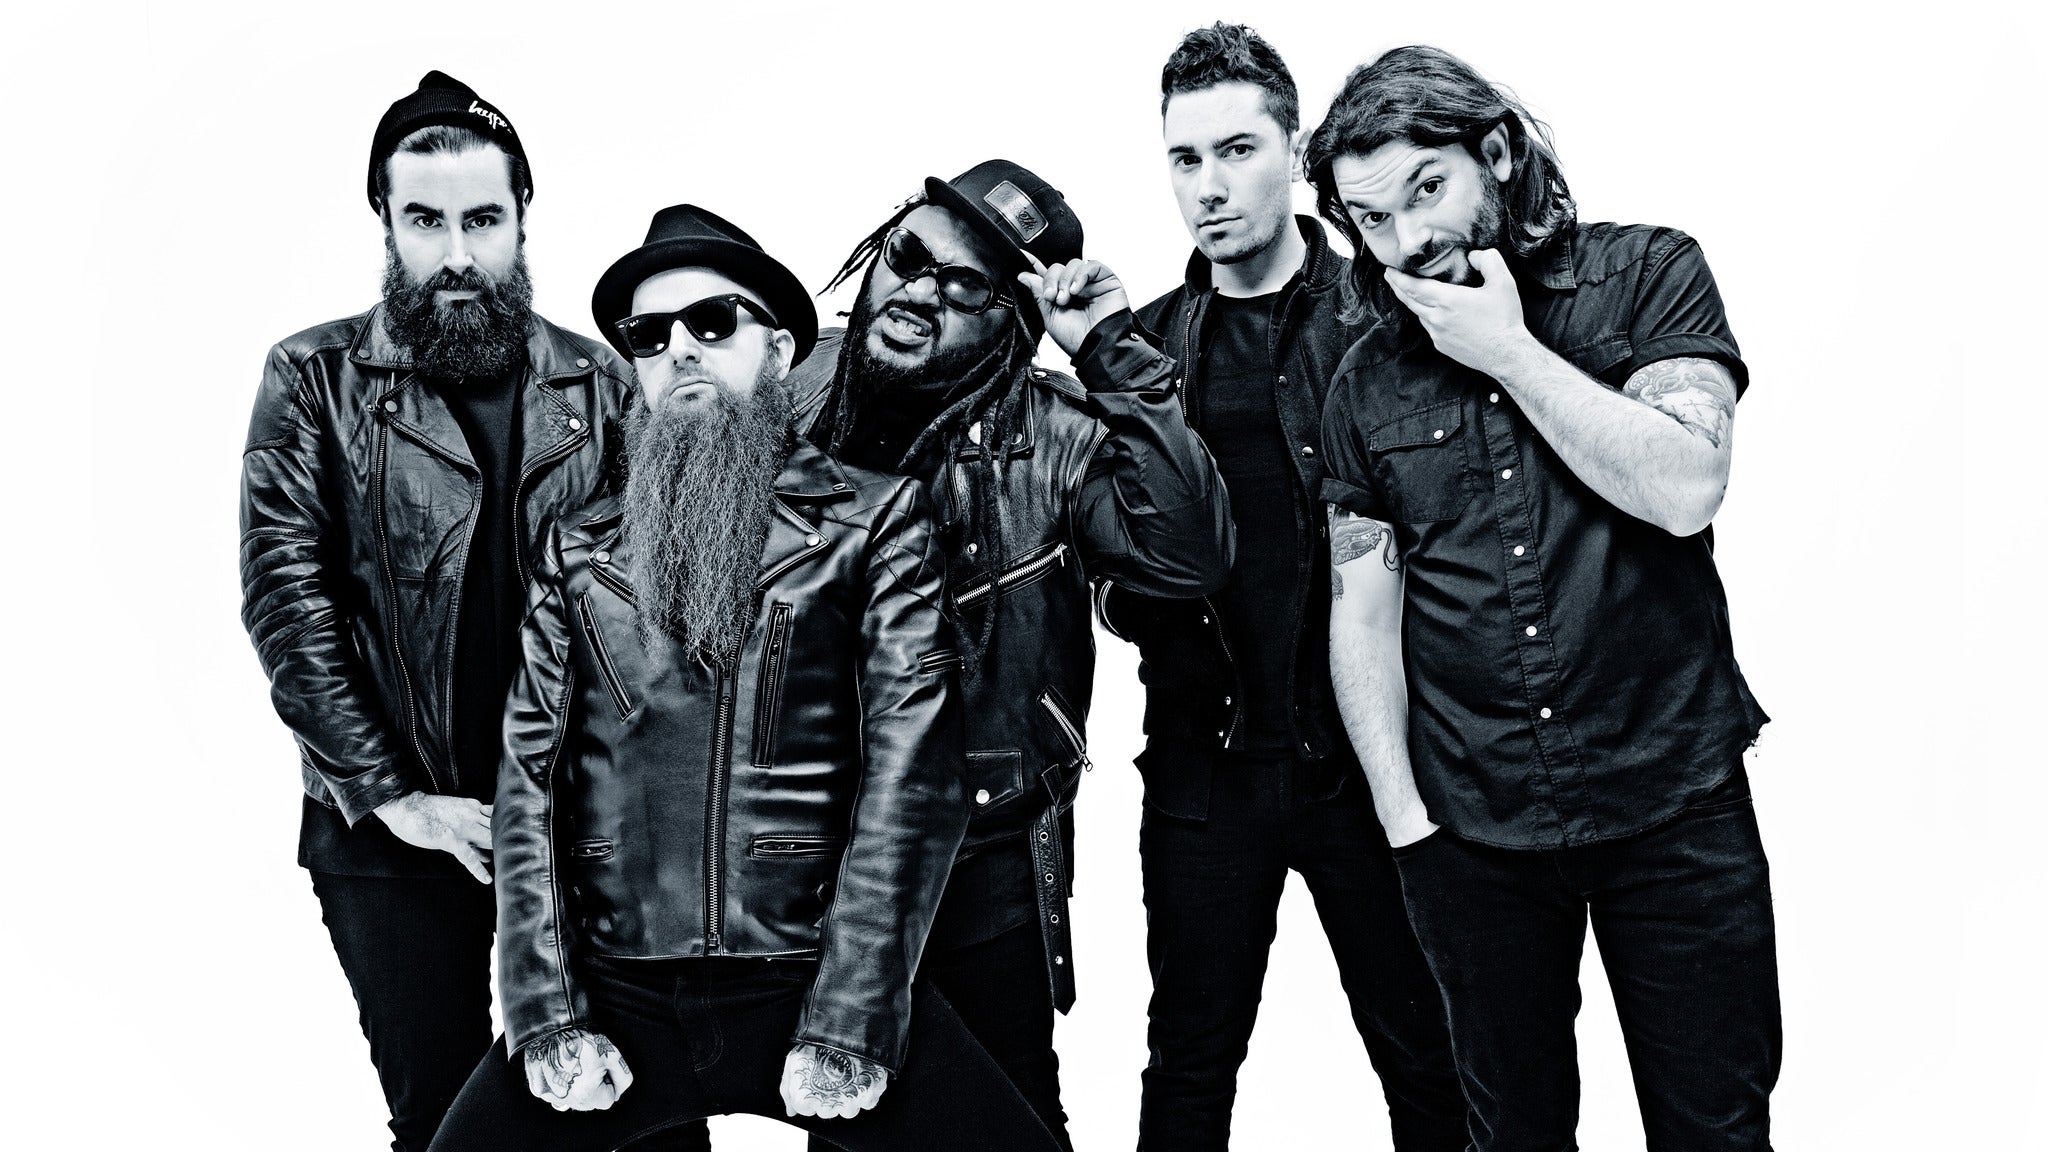 Skindred Sumo Cyco Raven Black Sin Mg Tickets Tuesday October